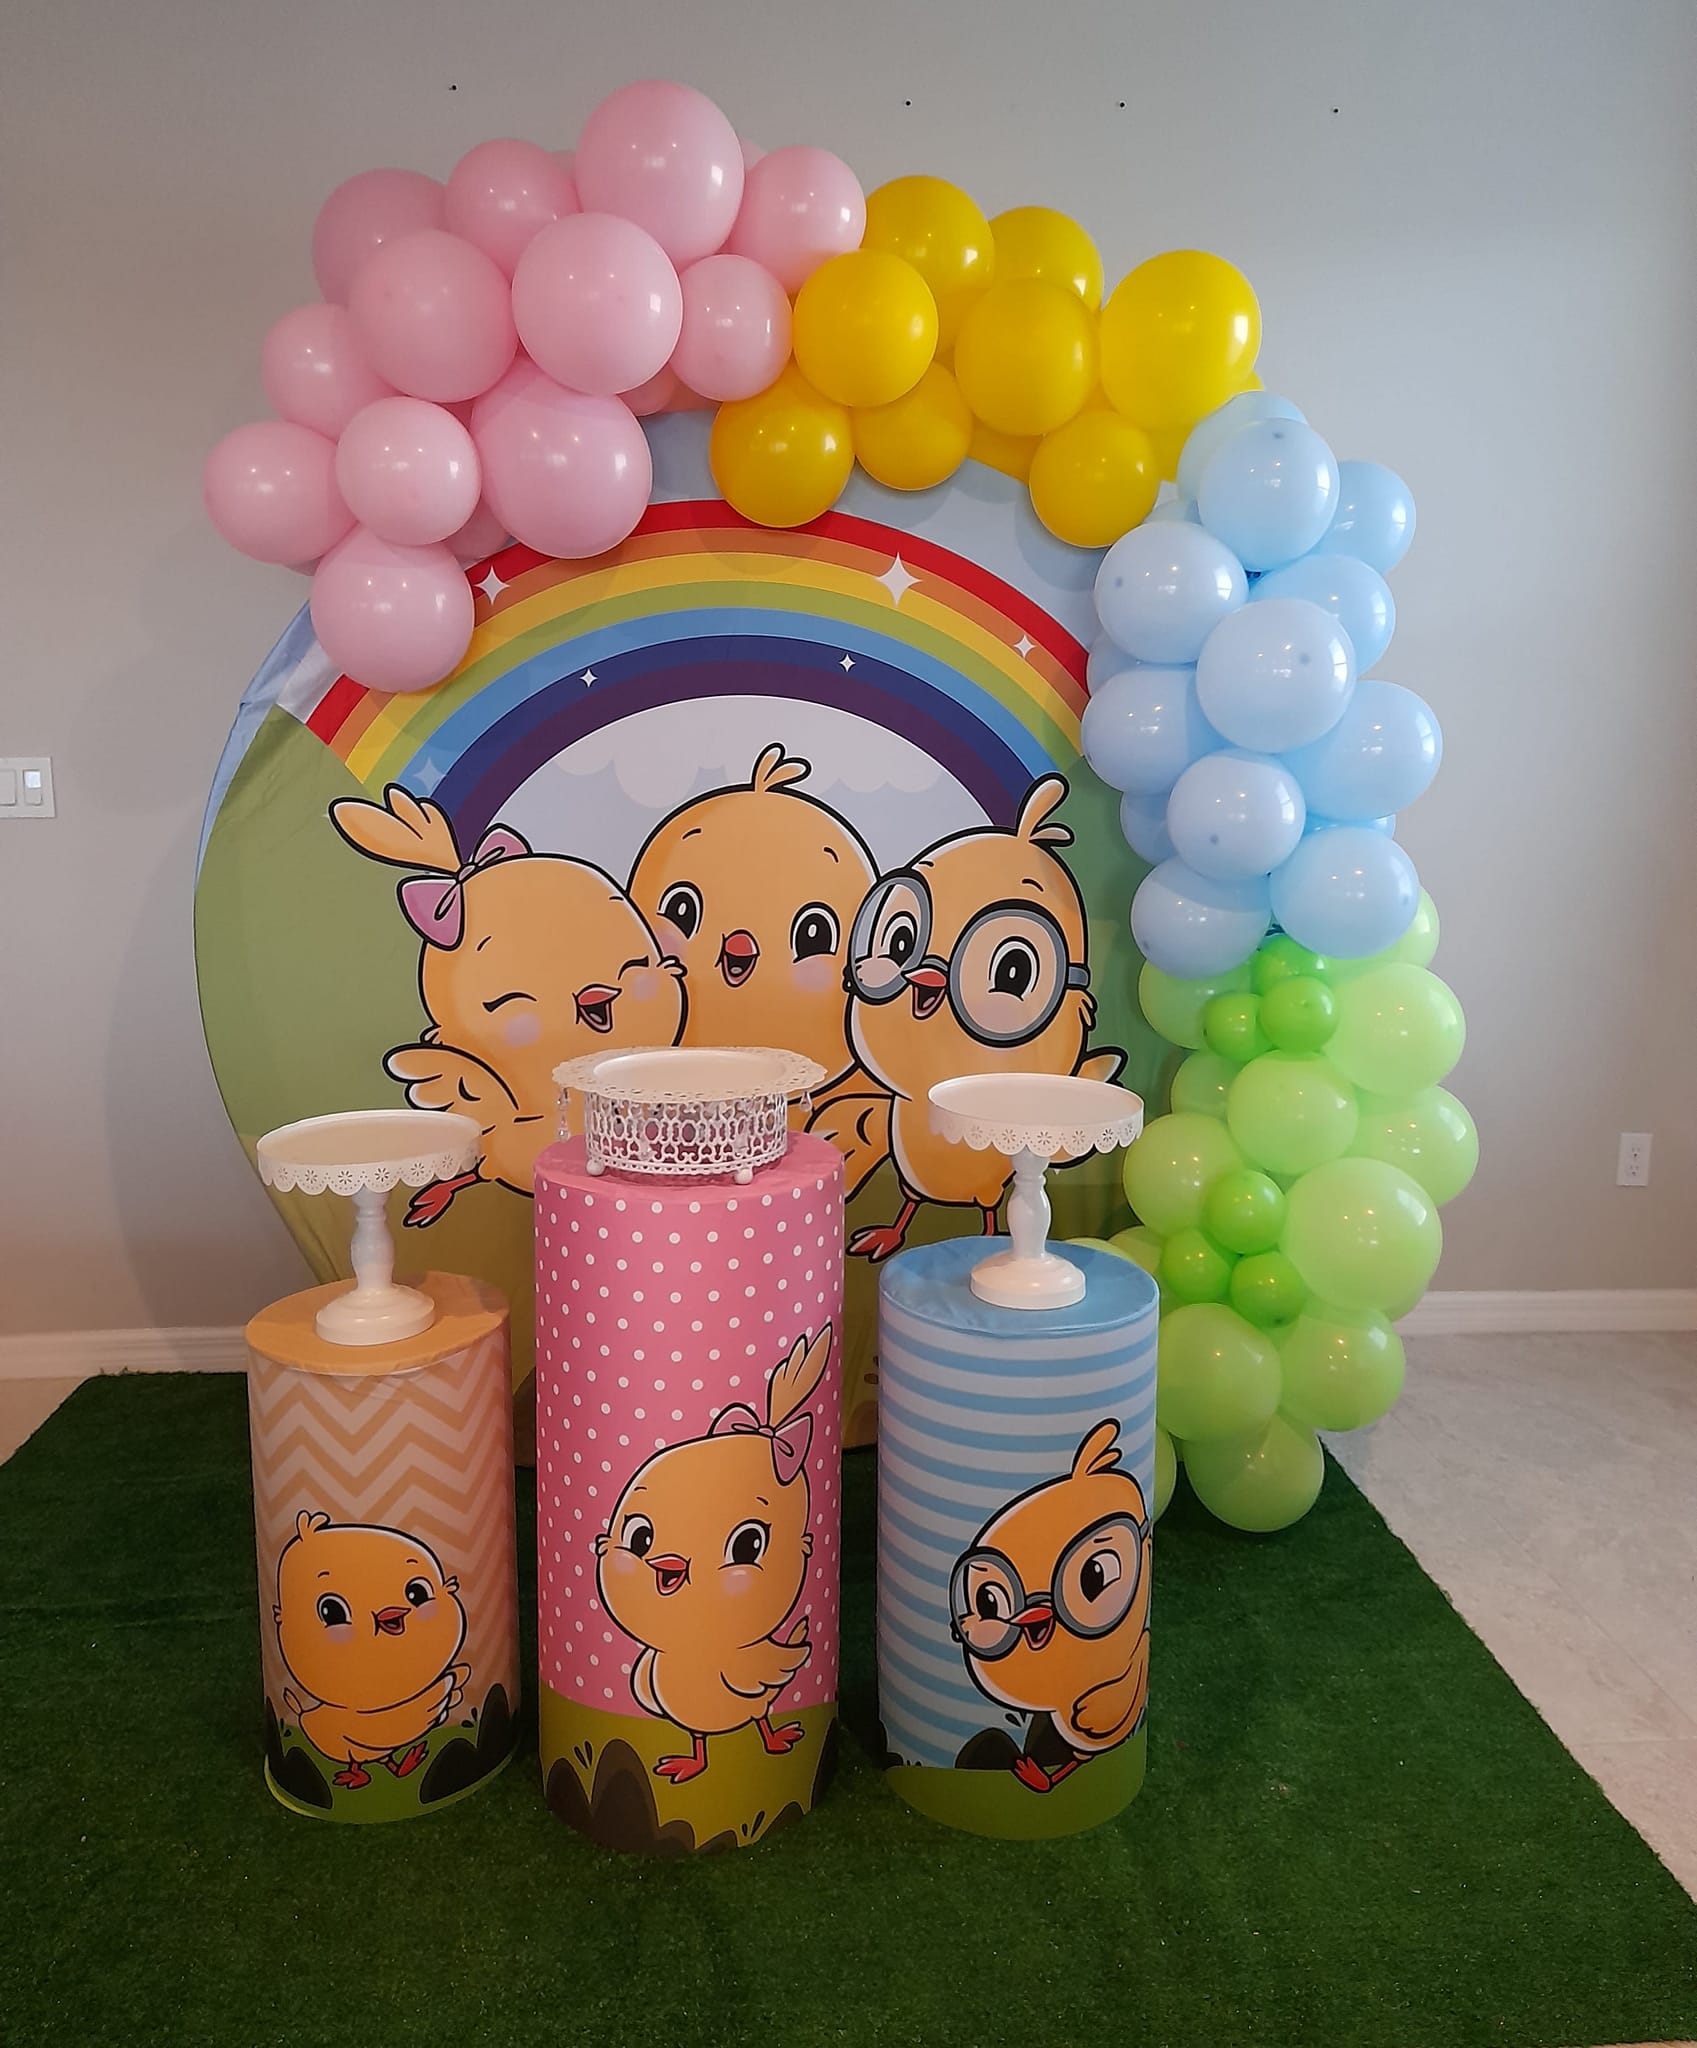 Birthday Party Decoration for Canticos, Include Kids Songs Theme Birthday Banner, Cake Topper, Latex Balloons, for Canticos Theme Baby Shower Kids